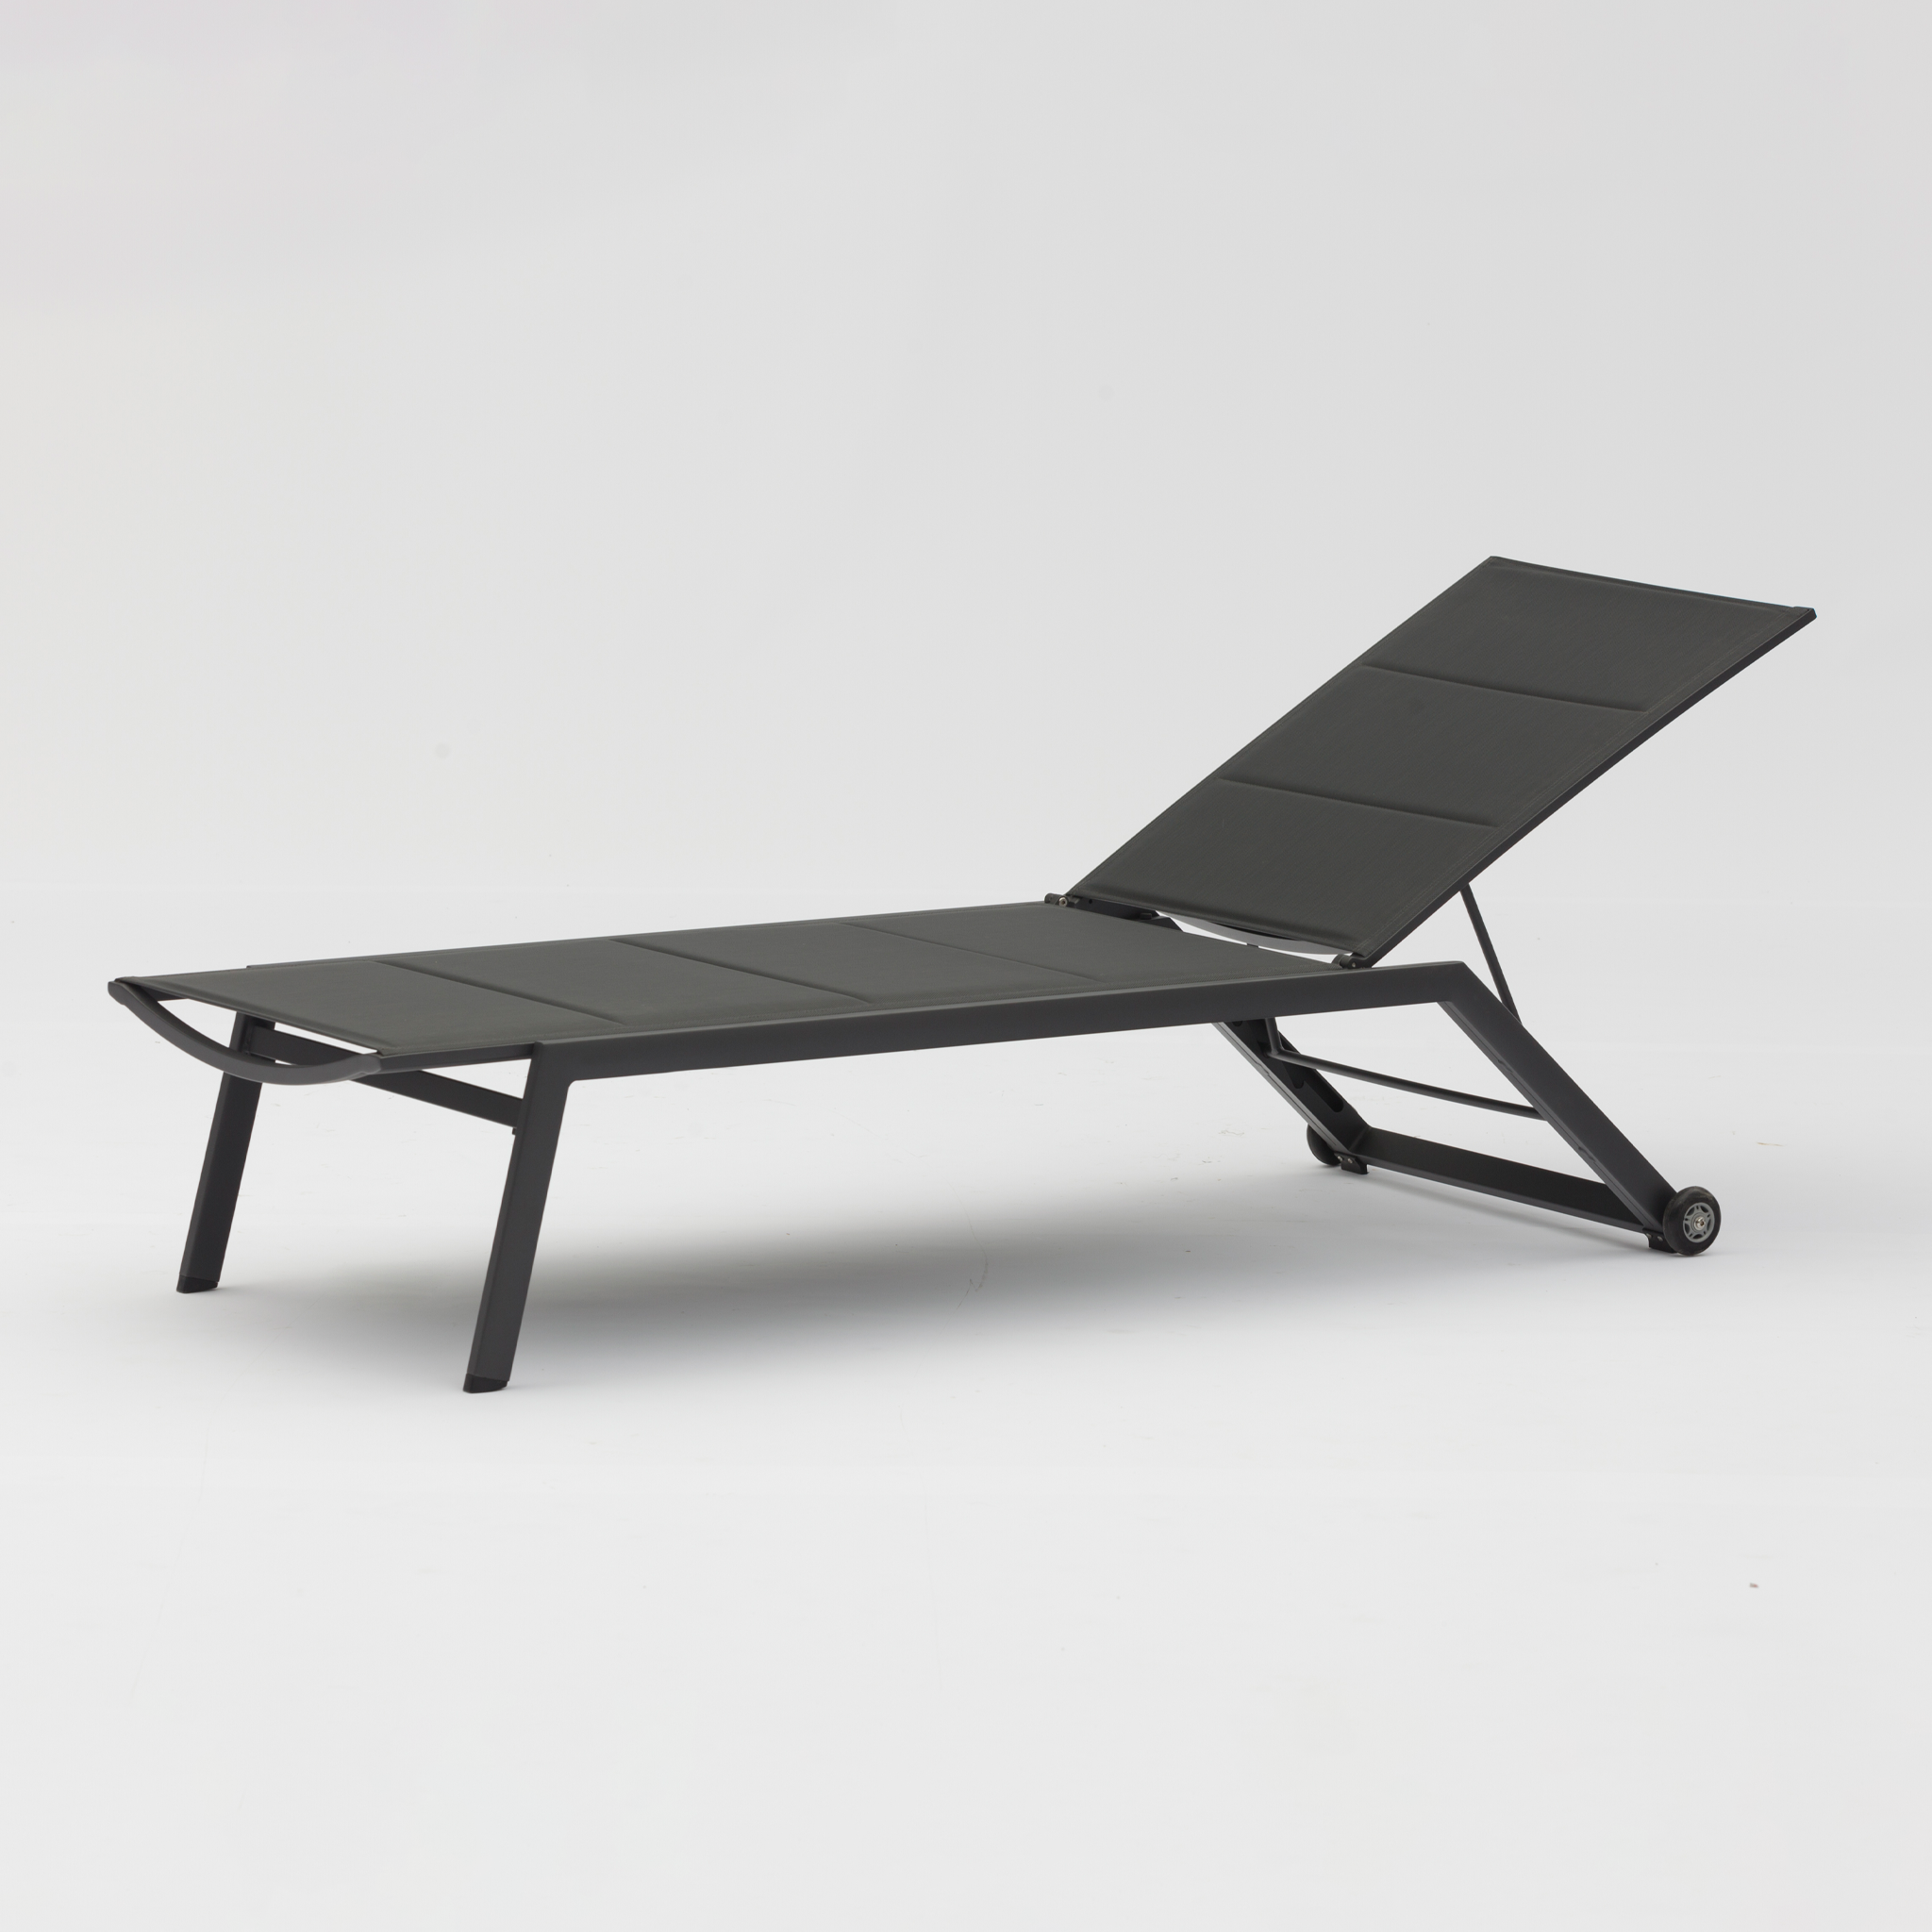 Monaco Padded Sunlounger in Charcoal